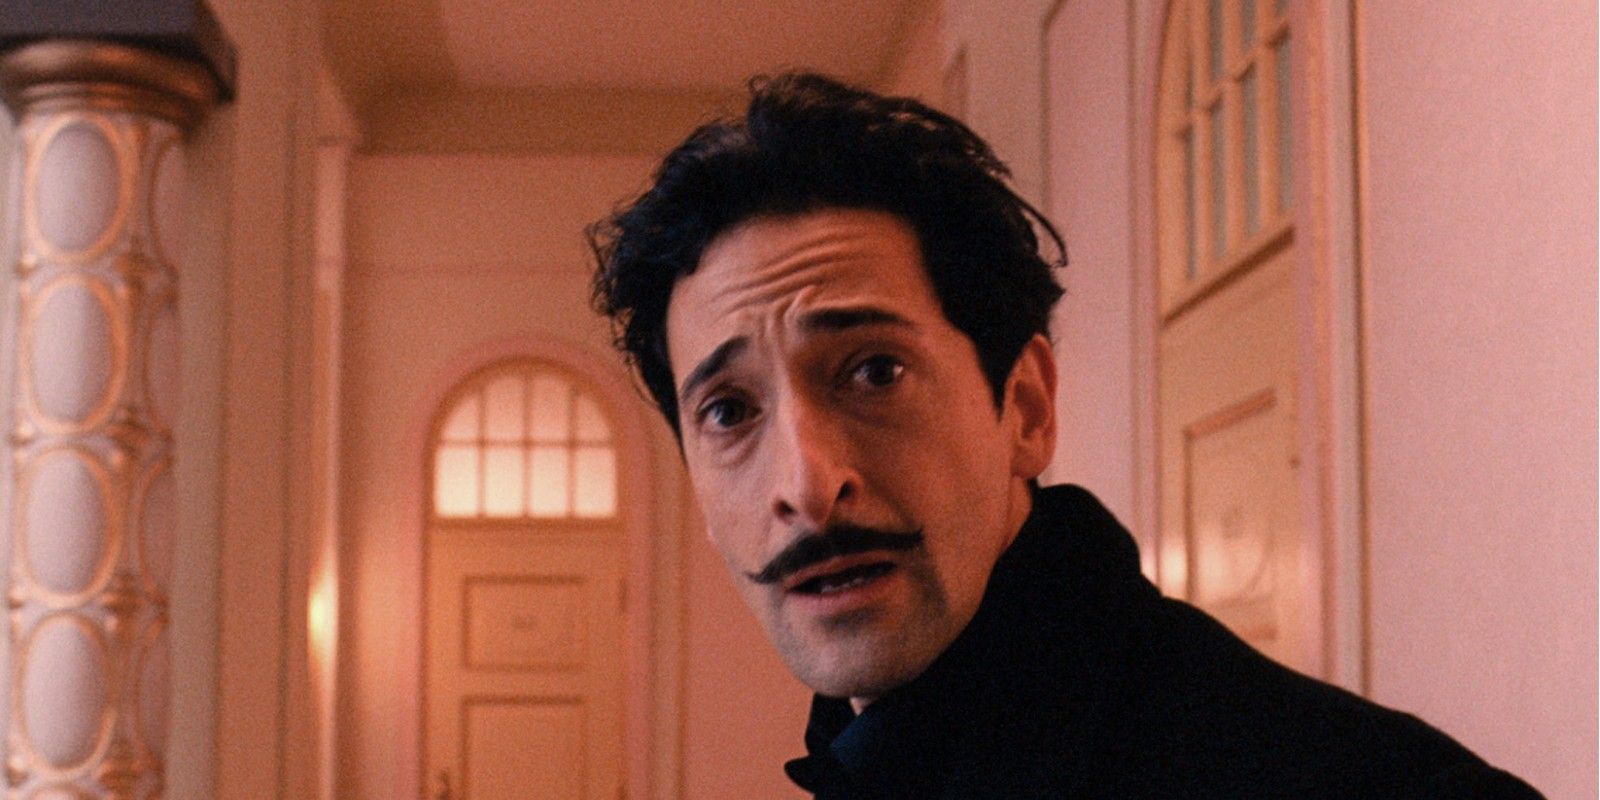 Adrien Brody in the Grand Budapest Hotel